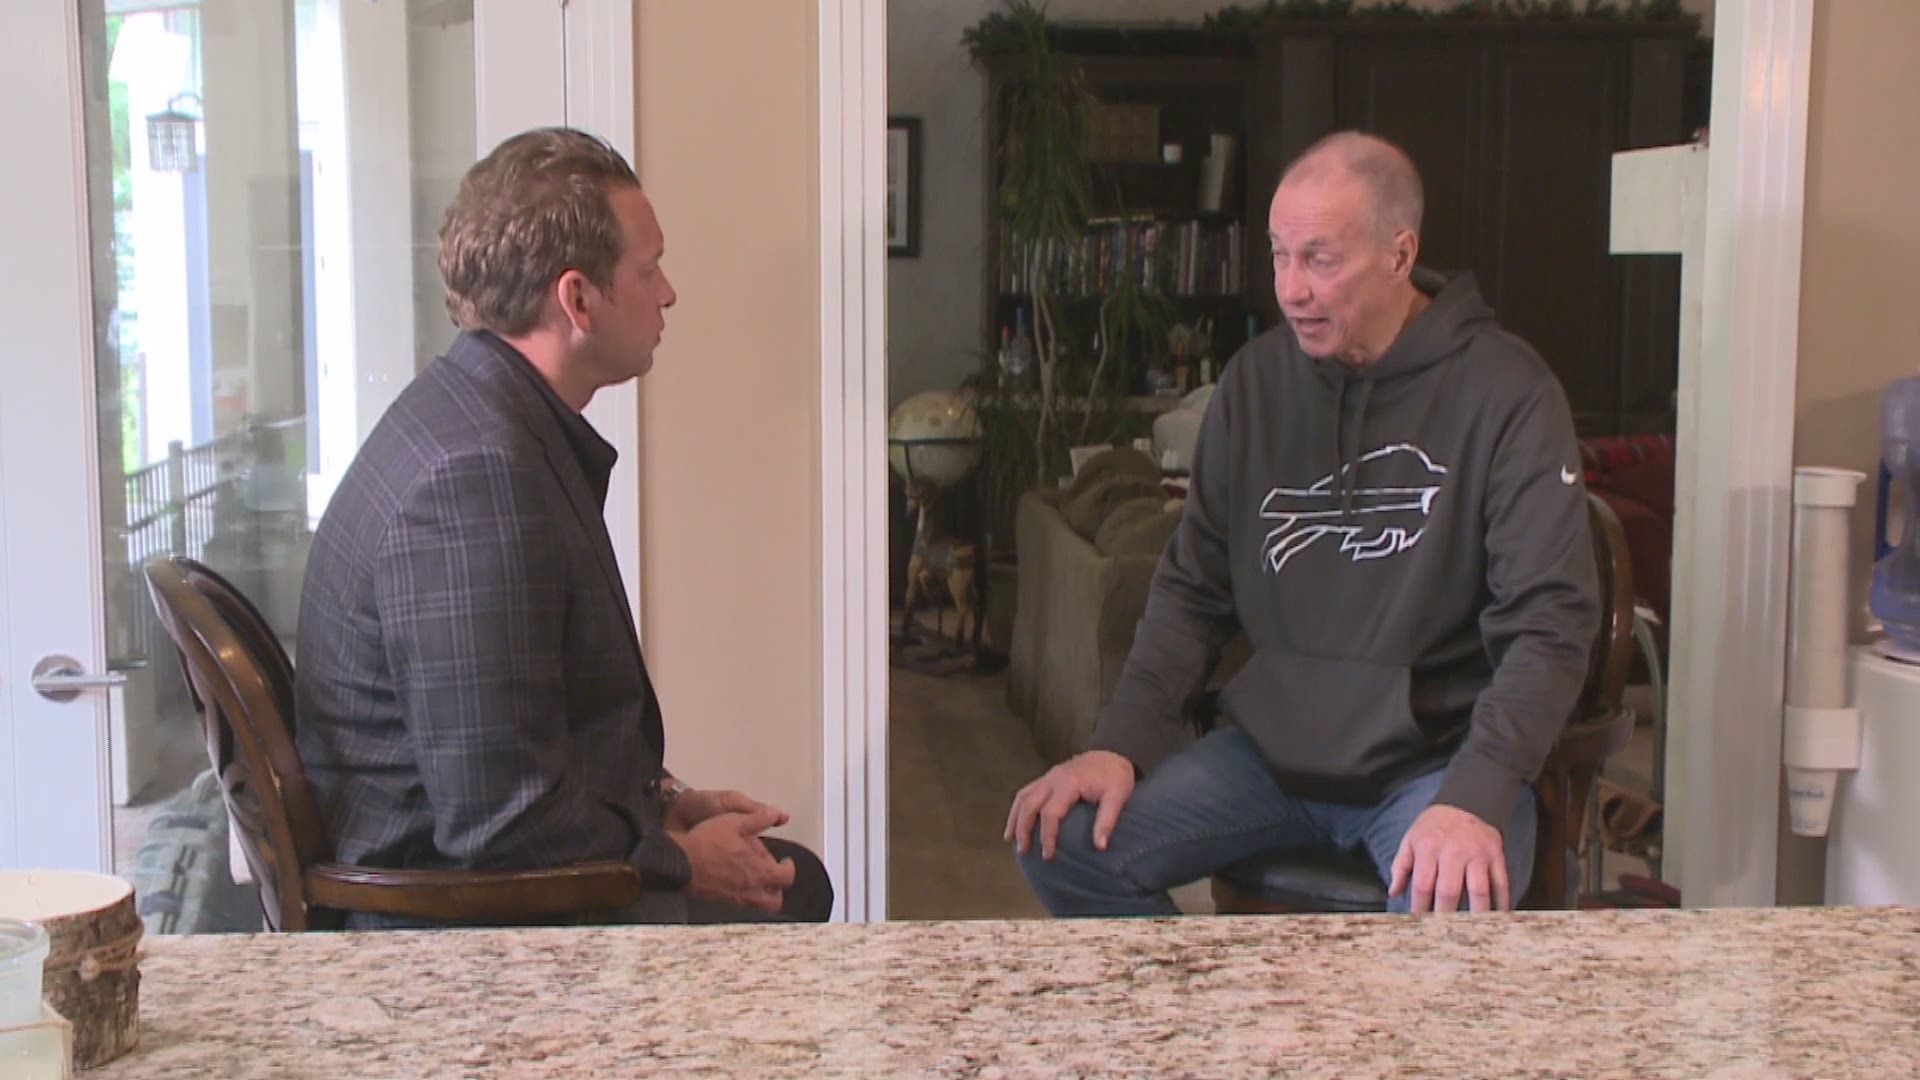 Jim Kelly opens up about his struggles with cancer, his support from the community and his desire to help others.  Take a look at a short preview of the entire interview airing tonight at 6.